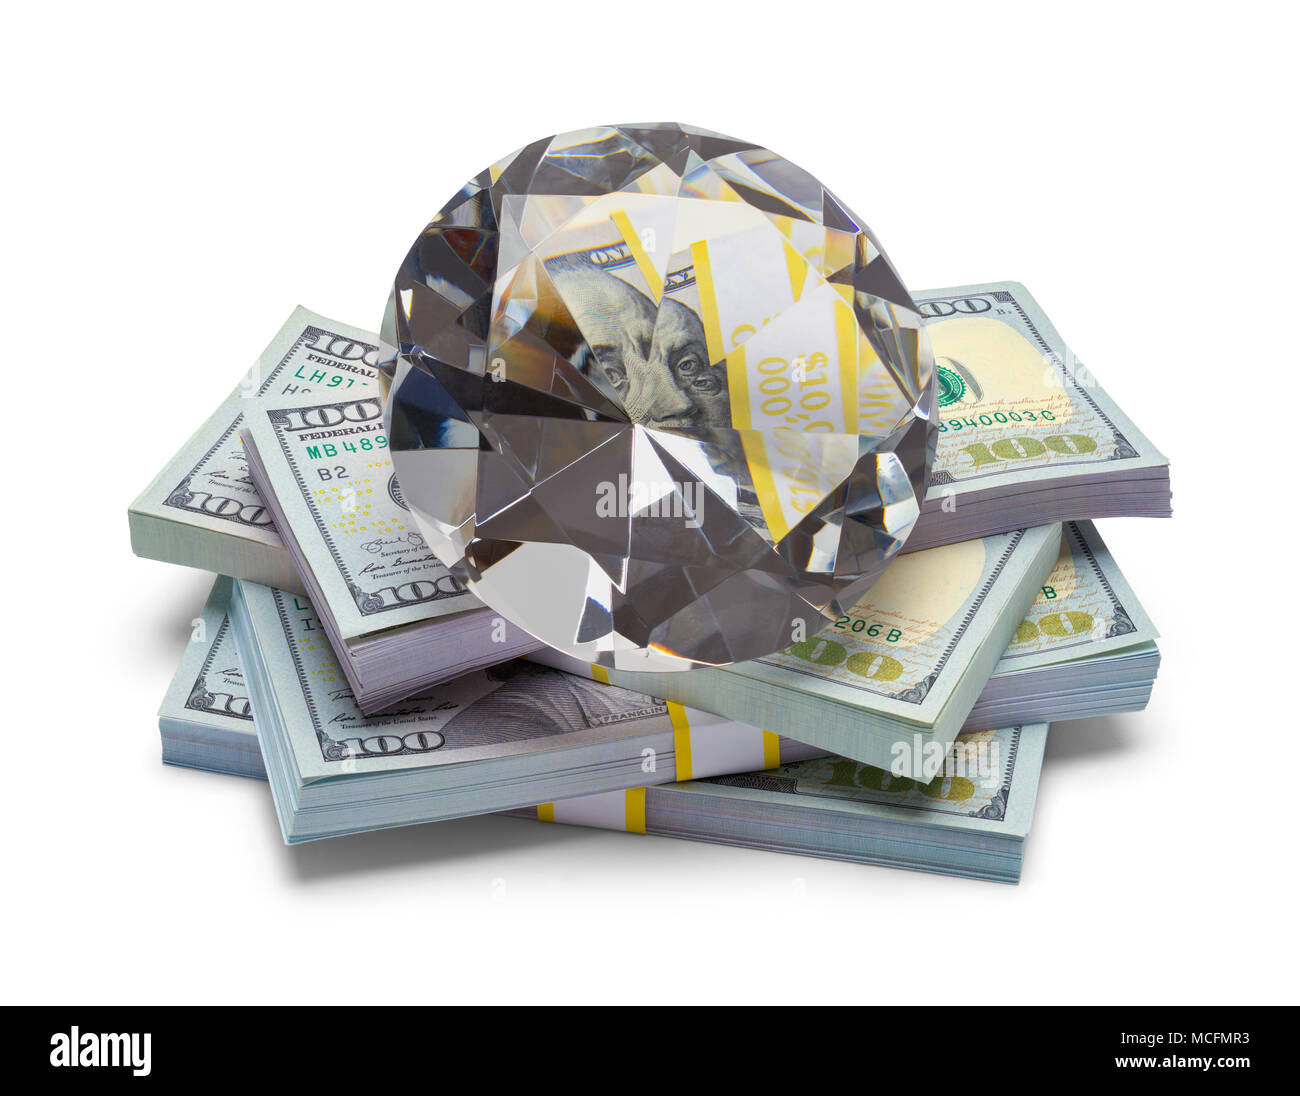 Pile of Money with a Large Diamond Isolated on a White Background. Stock Photo